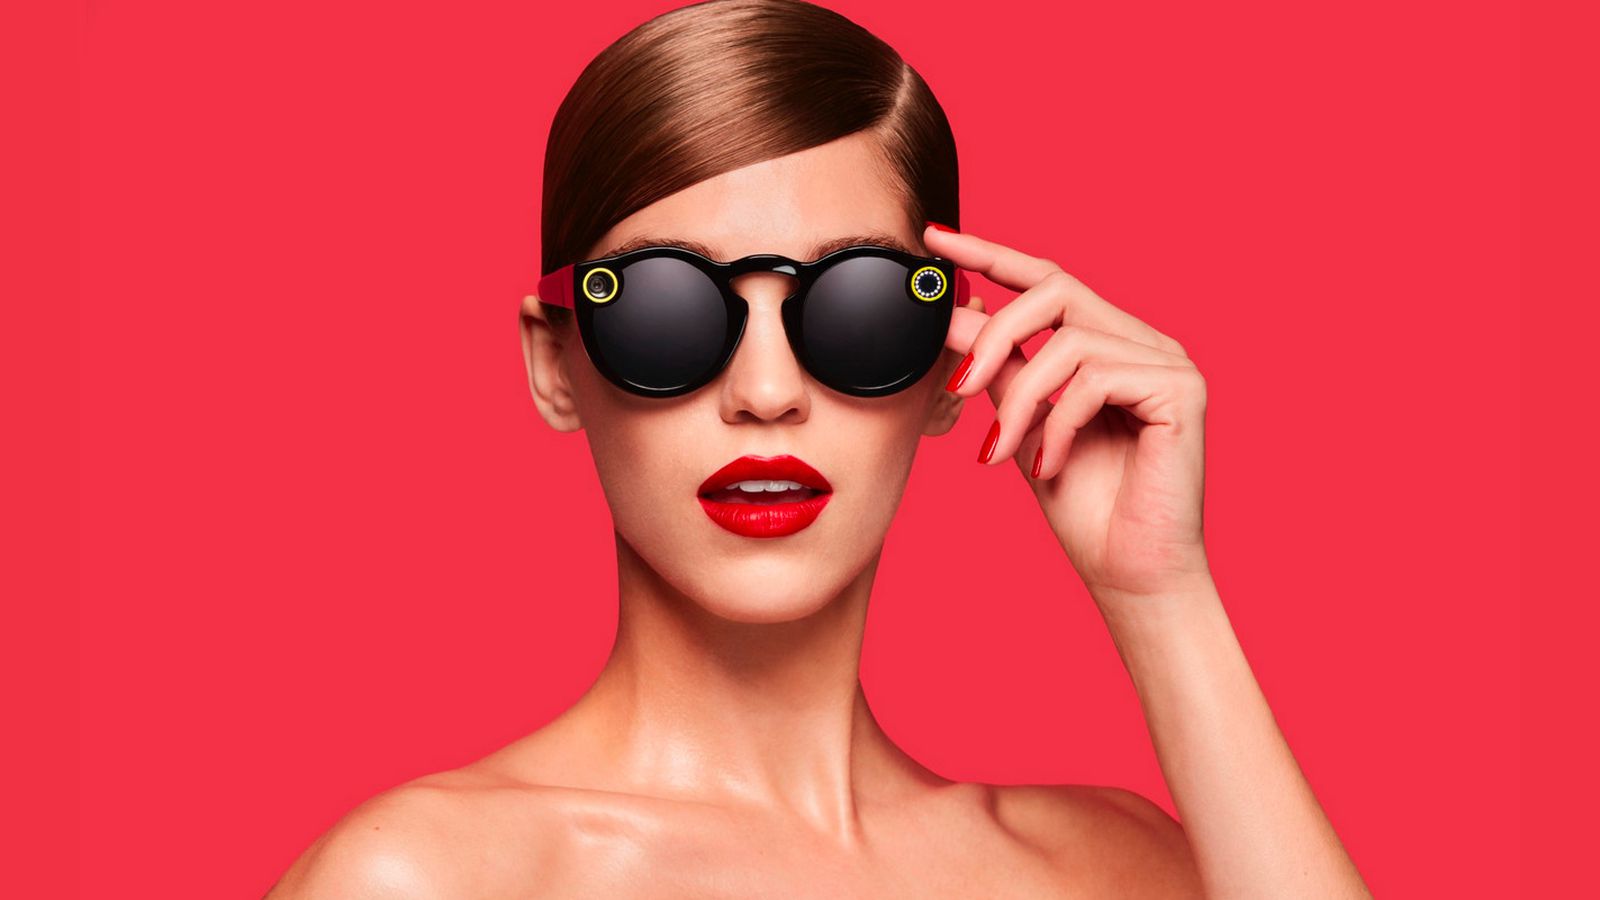 Snapchat Spectacles : A new view of life